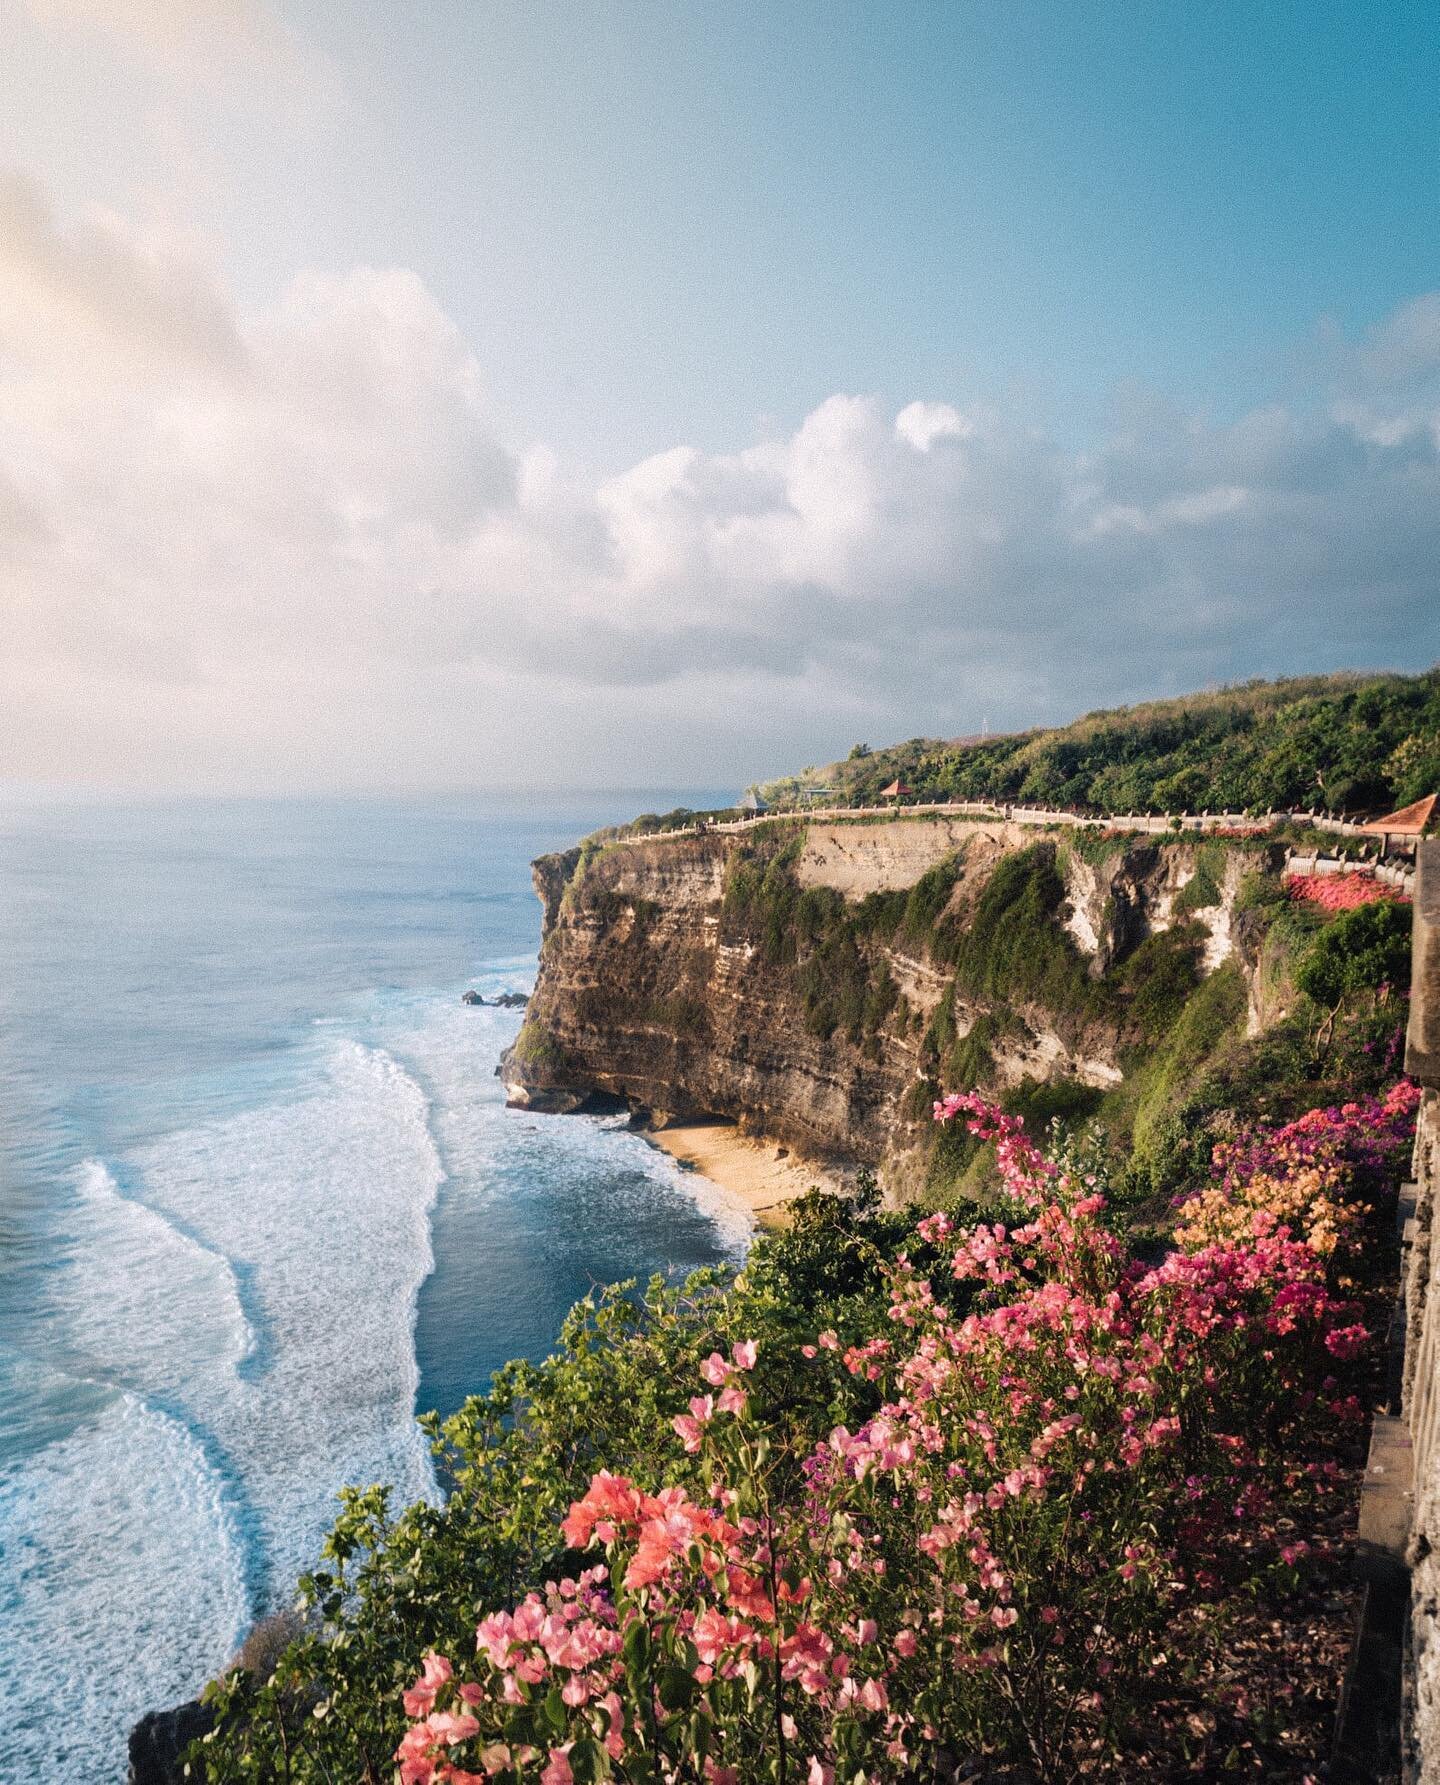 Uluwatu is a beautiful place but be warned, gangs of little hooligans patrol the temple grounds.

Be sure to watch yourself for the marauding monkeys stealing yo stuff and harassin&rsquo; your gal.

The famous temple here has been around for hundred 